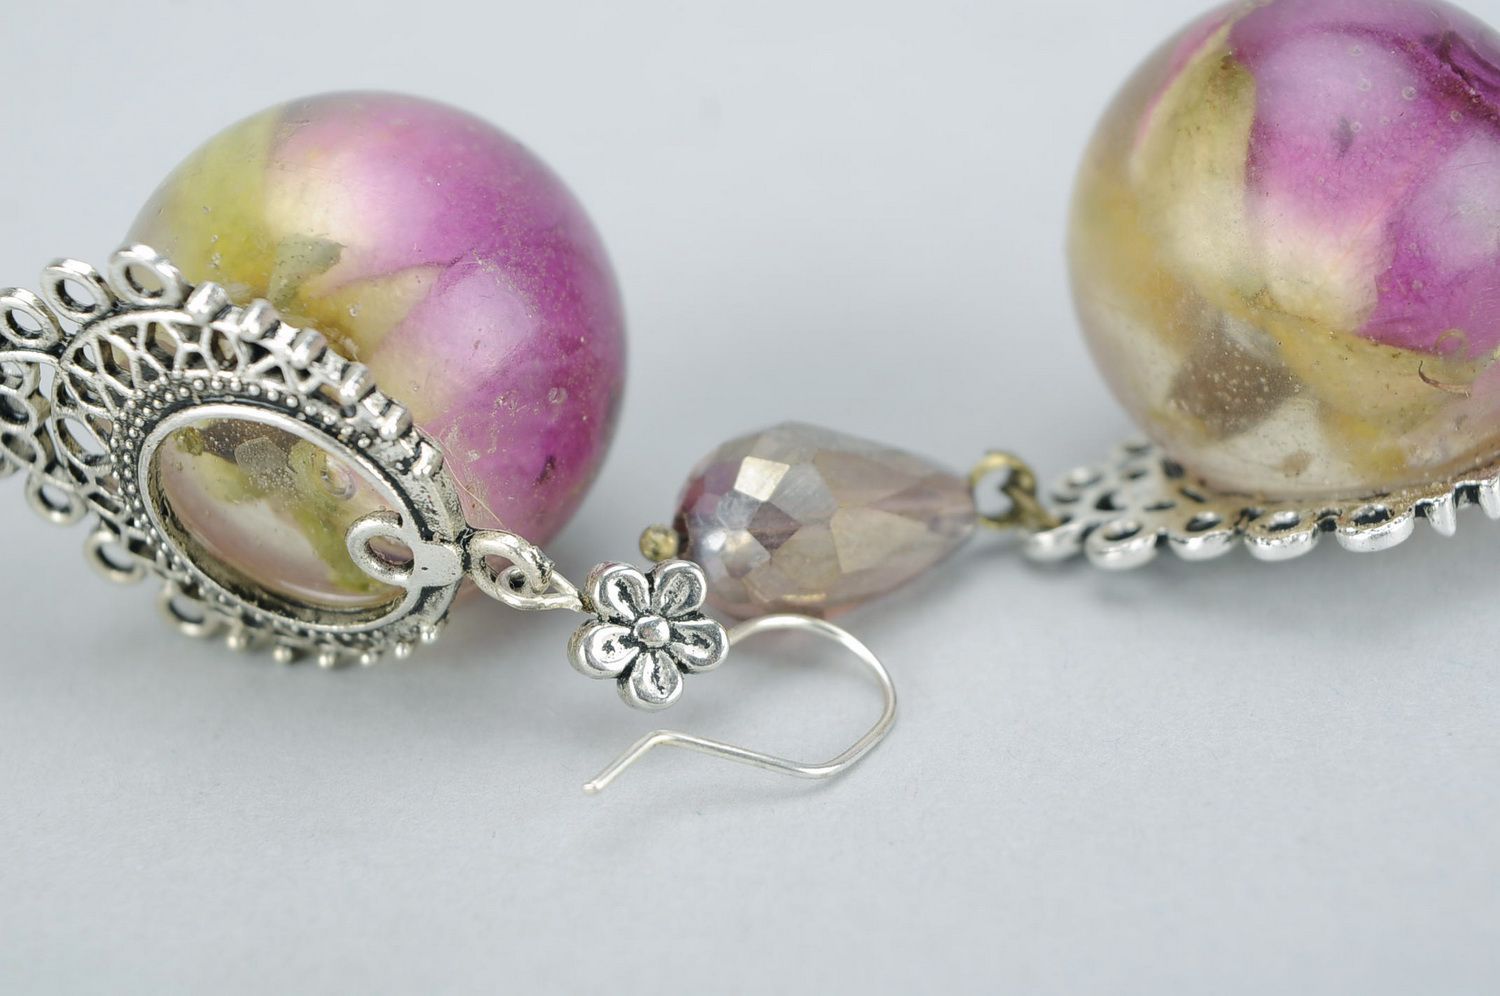 Earrings made from rose petals photo 5